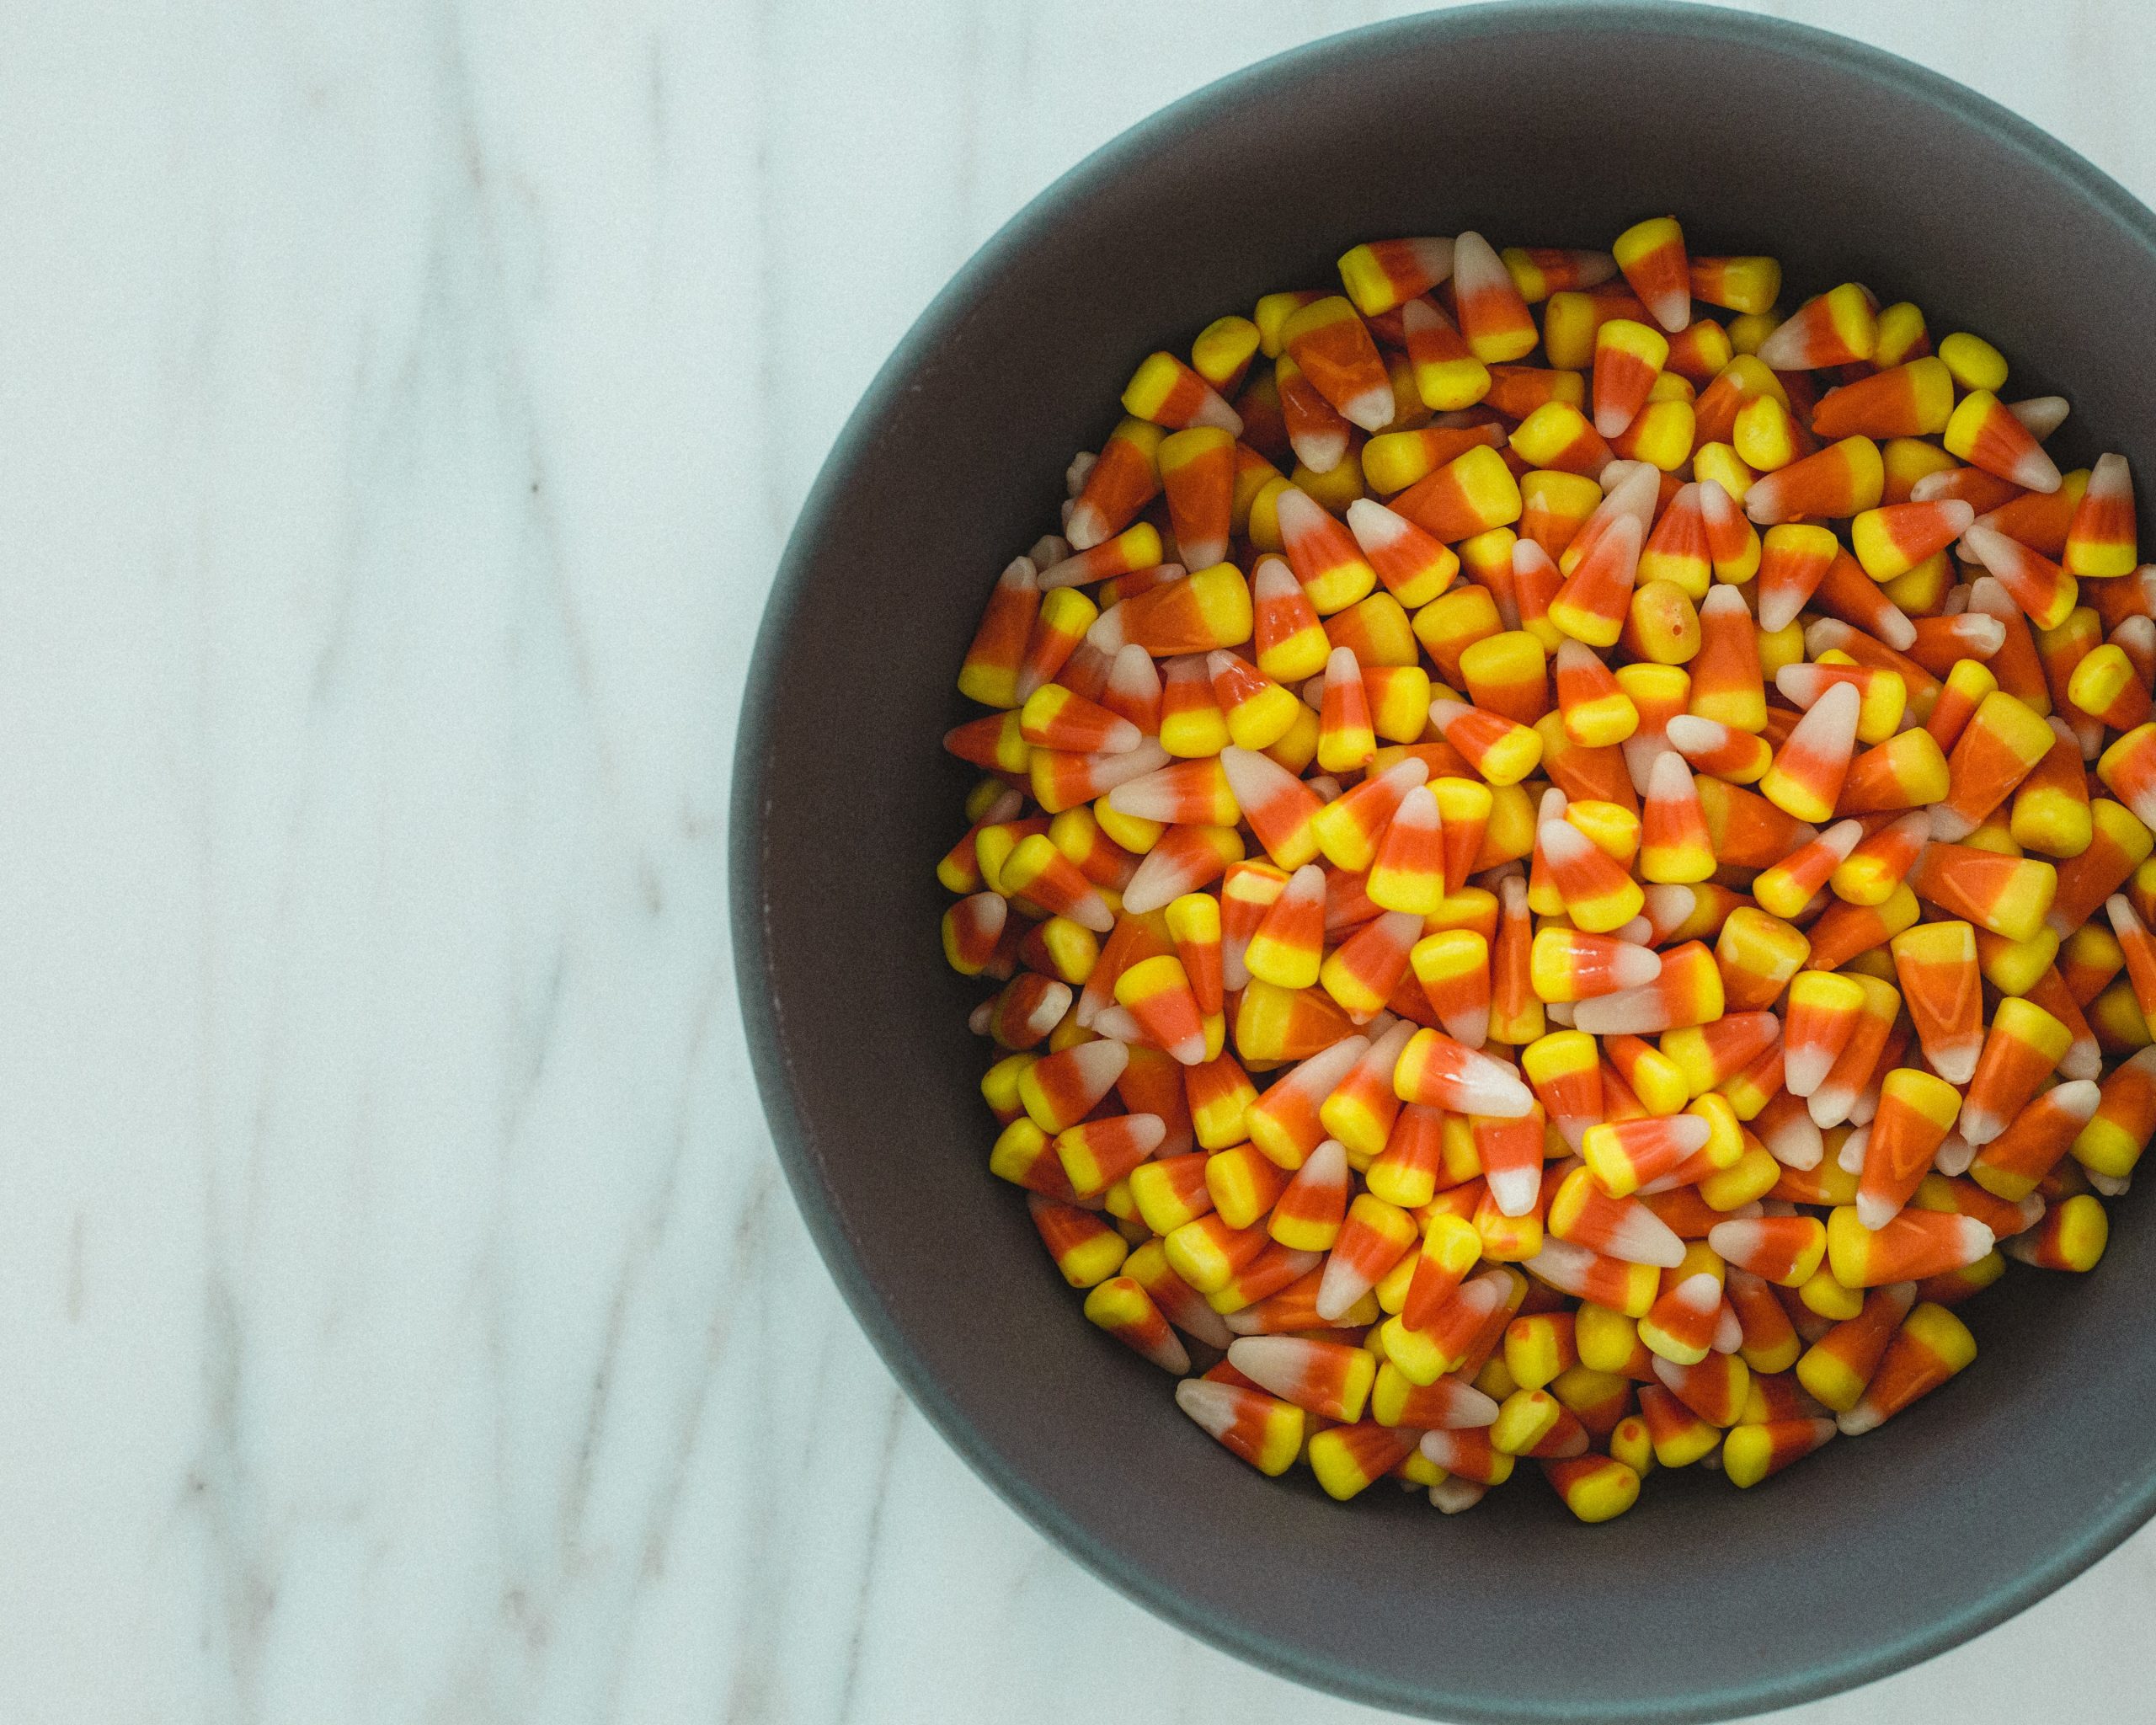 Vegan Candy Corn Recipes with Ingredients